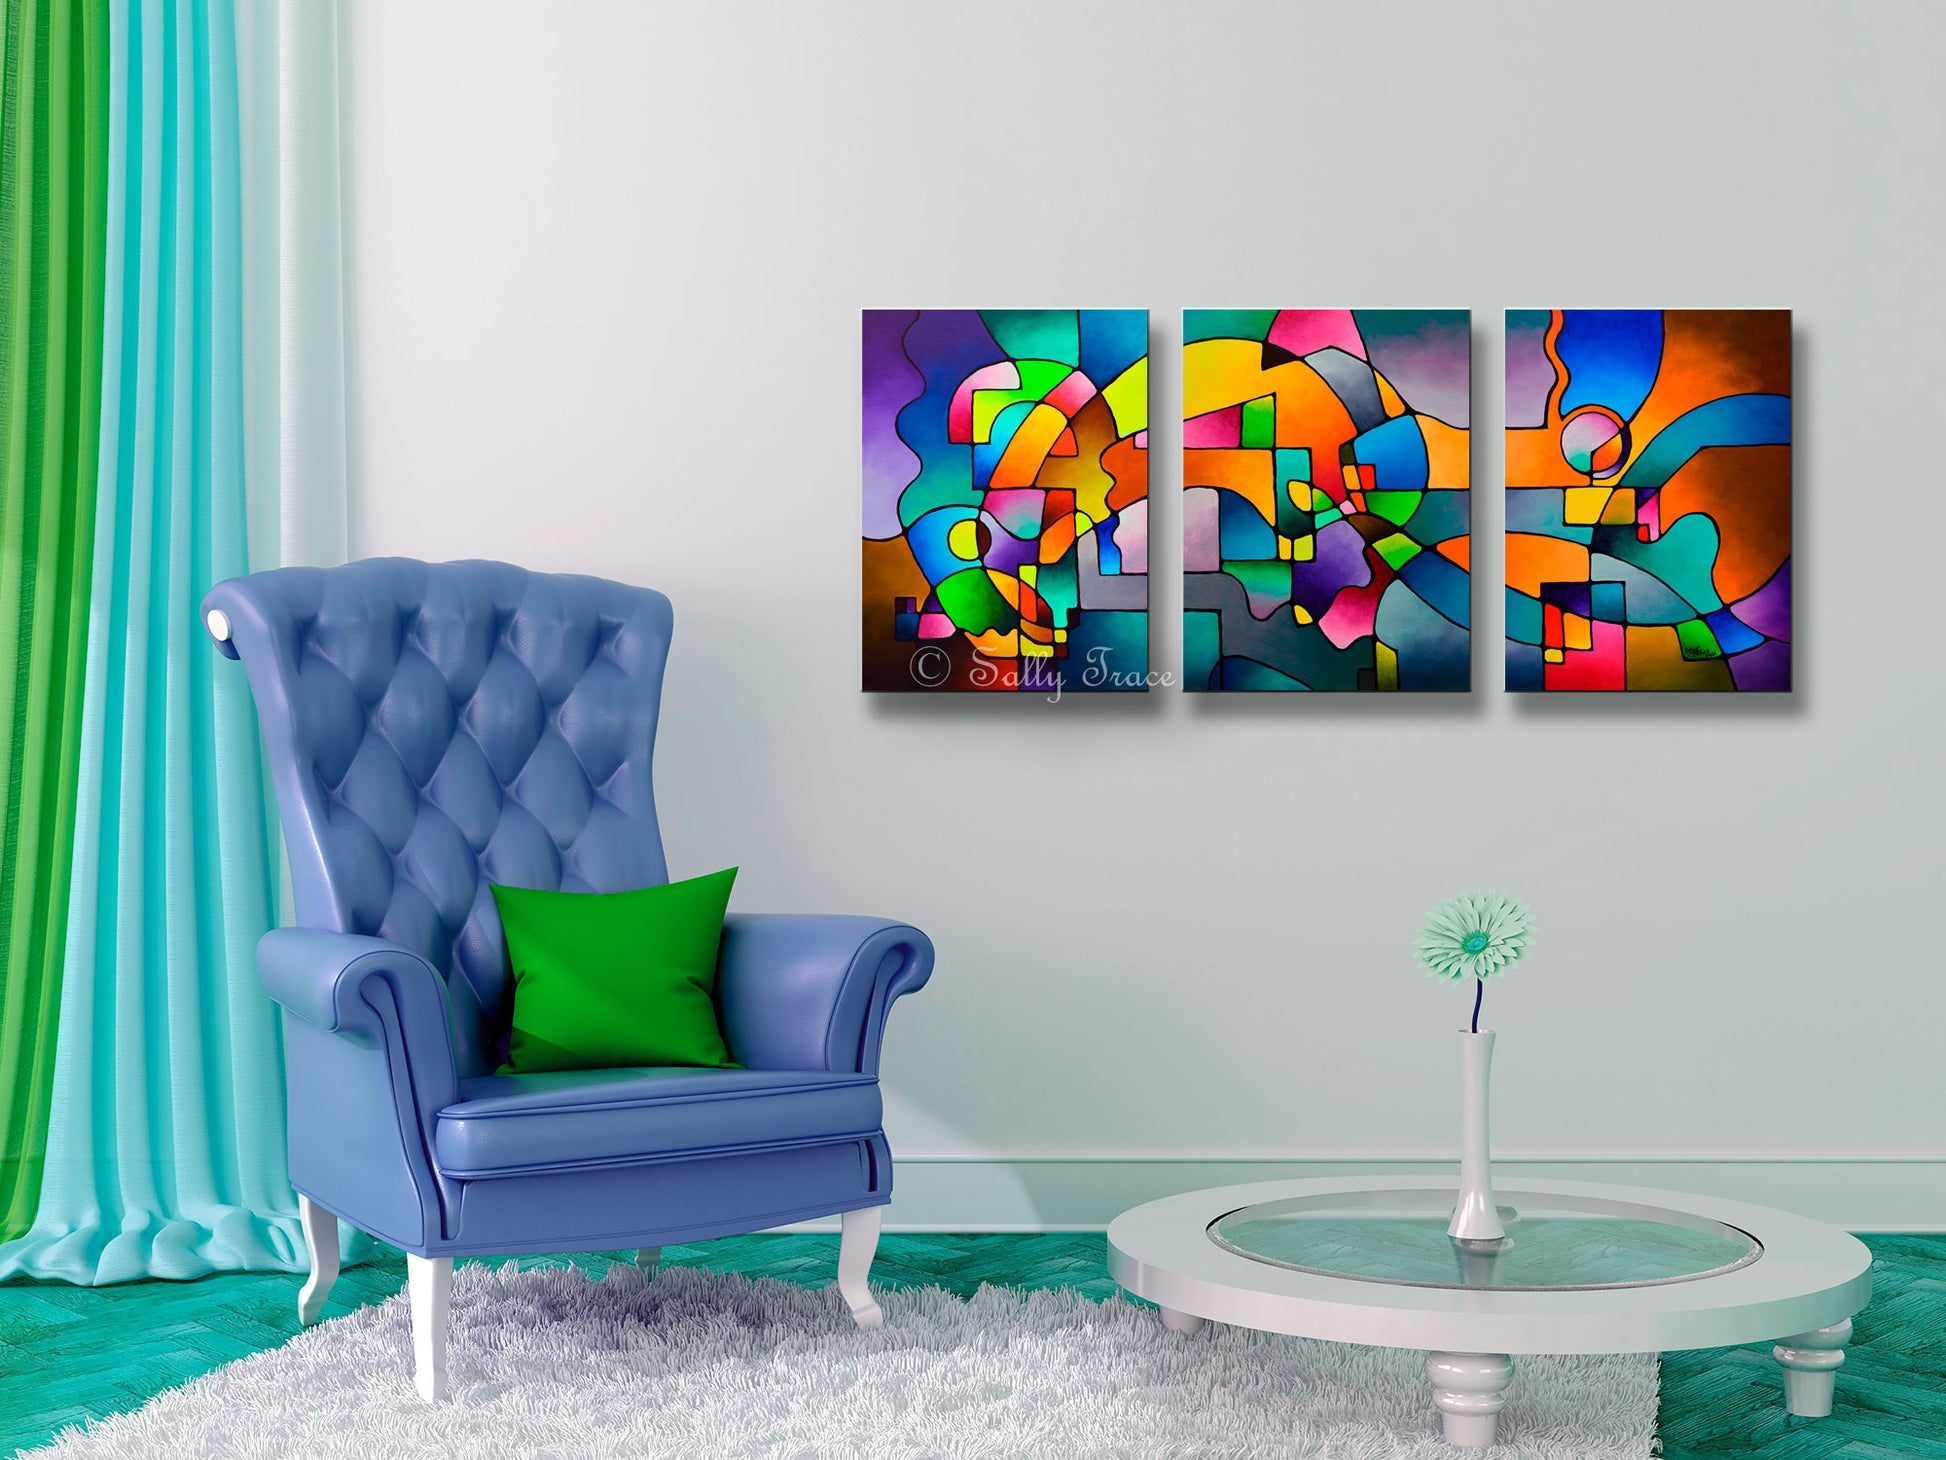 Modern art triptych giclee prints from my original geometric art acrylic painting by Sally Trace, modern living room wall decor.